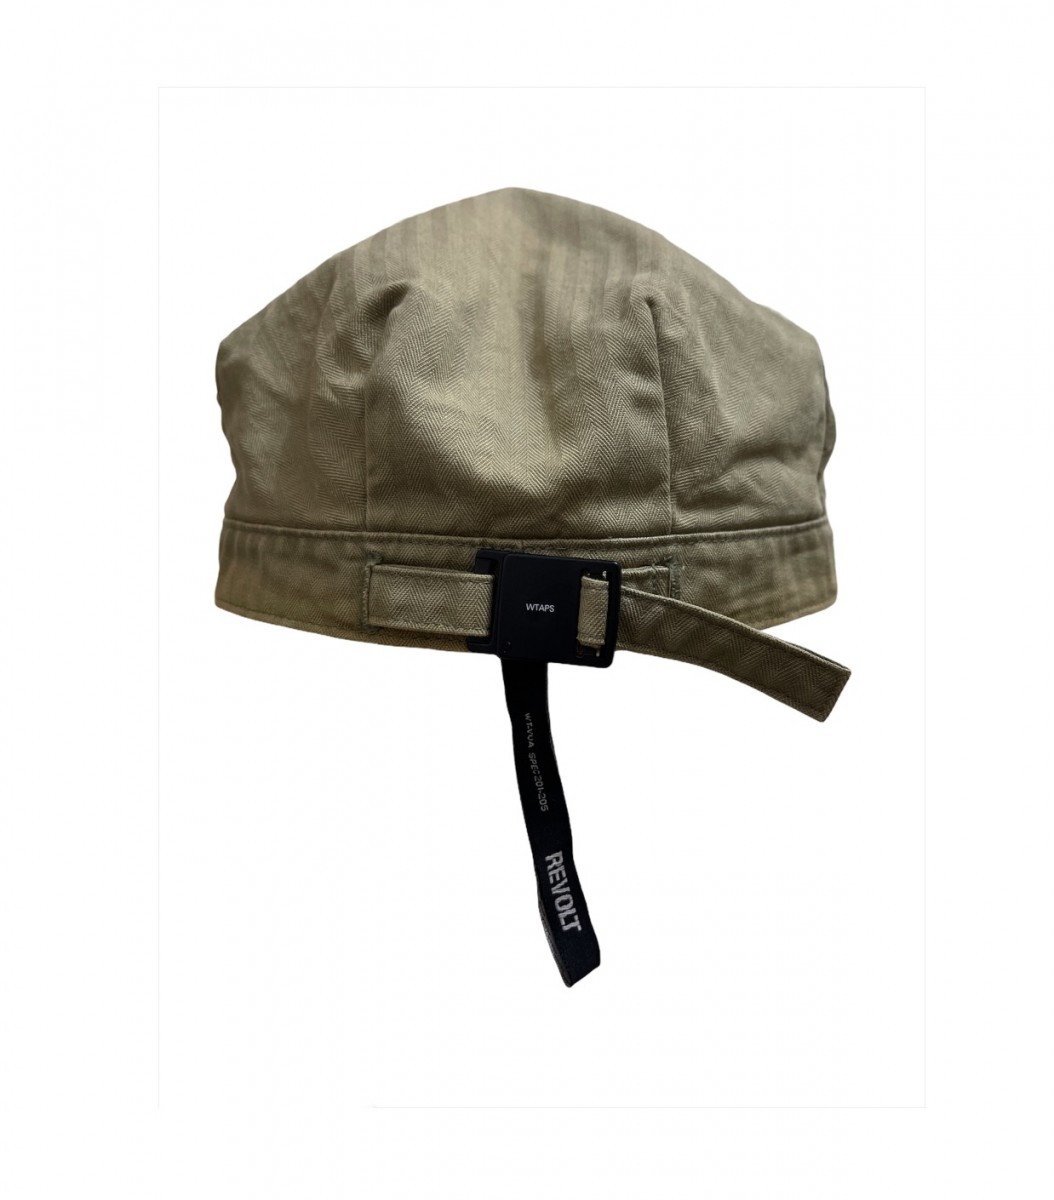 Beige Army Caps / Hat - 4